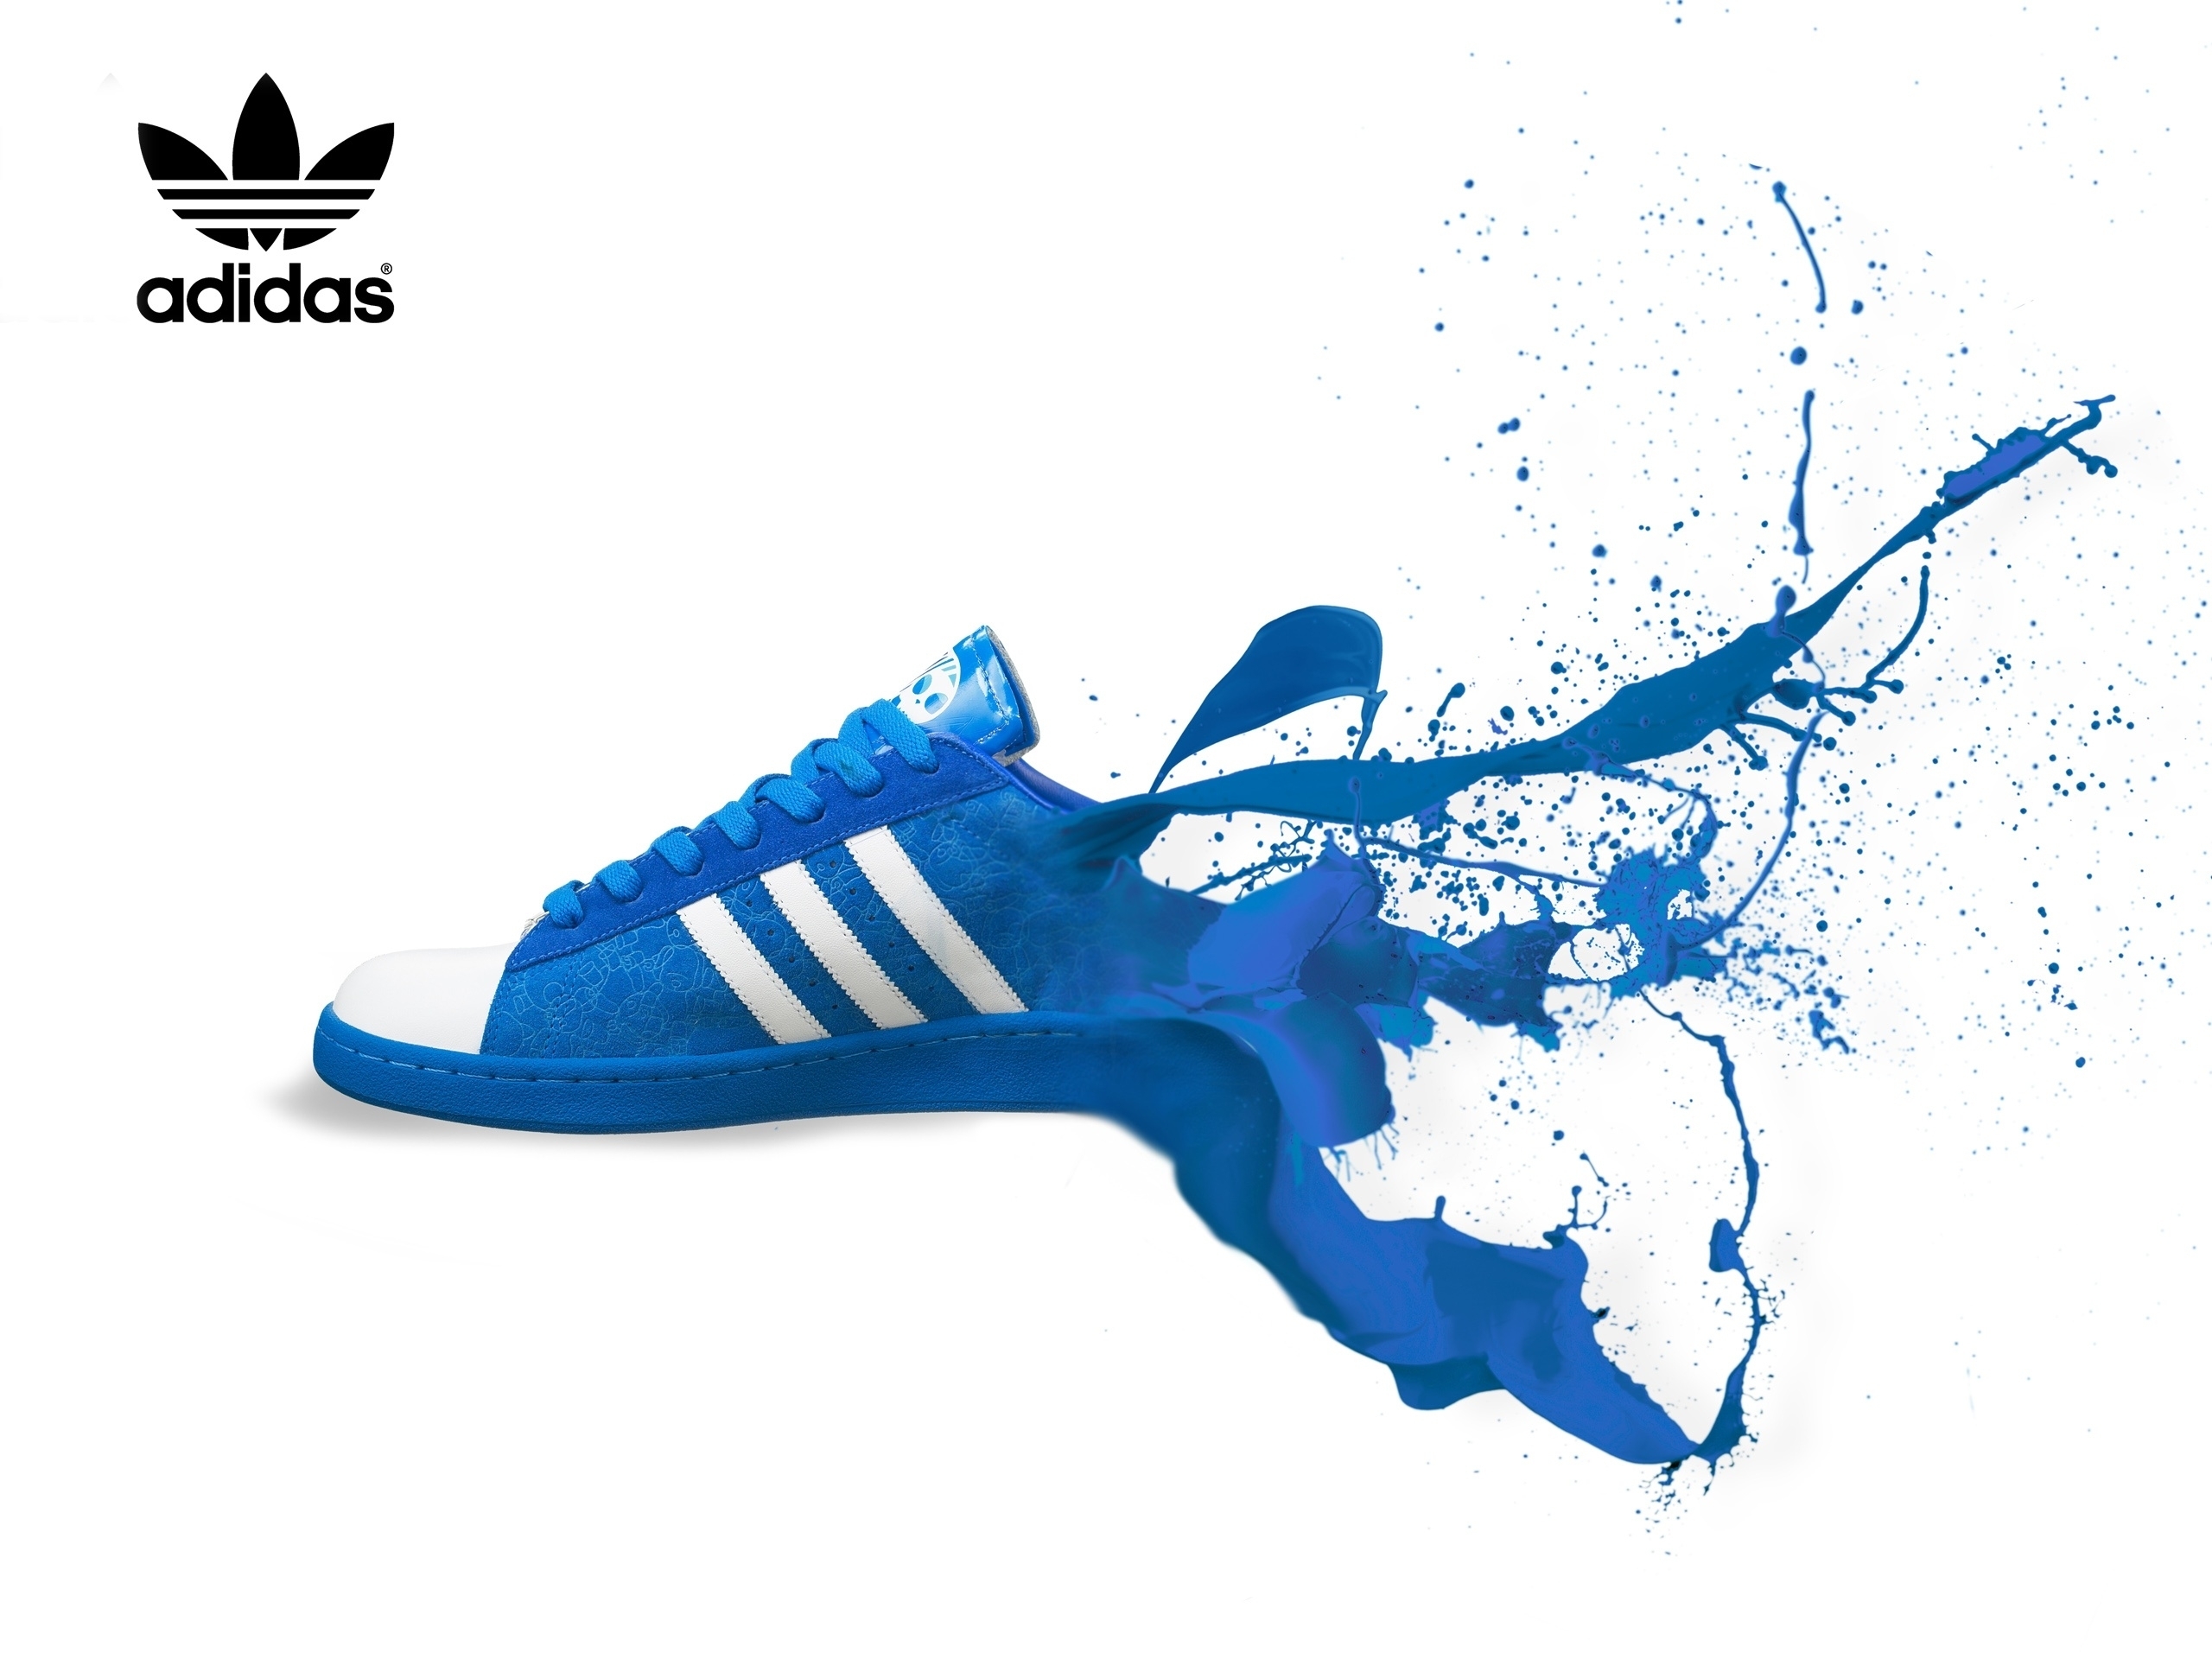 Products Adidas 2560x1920